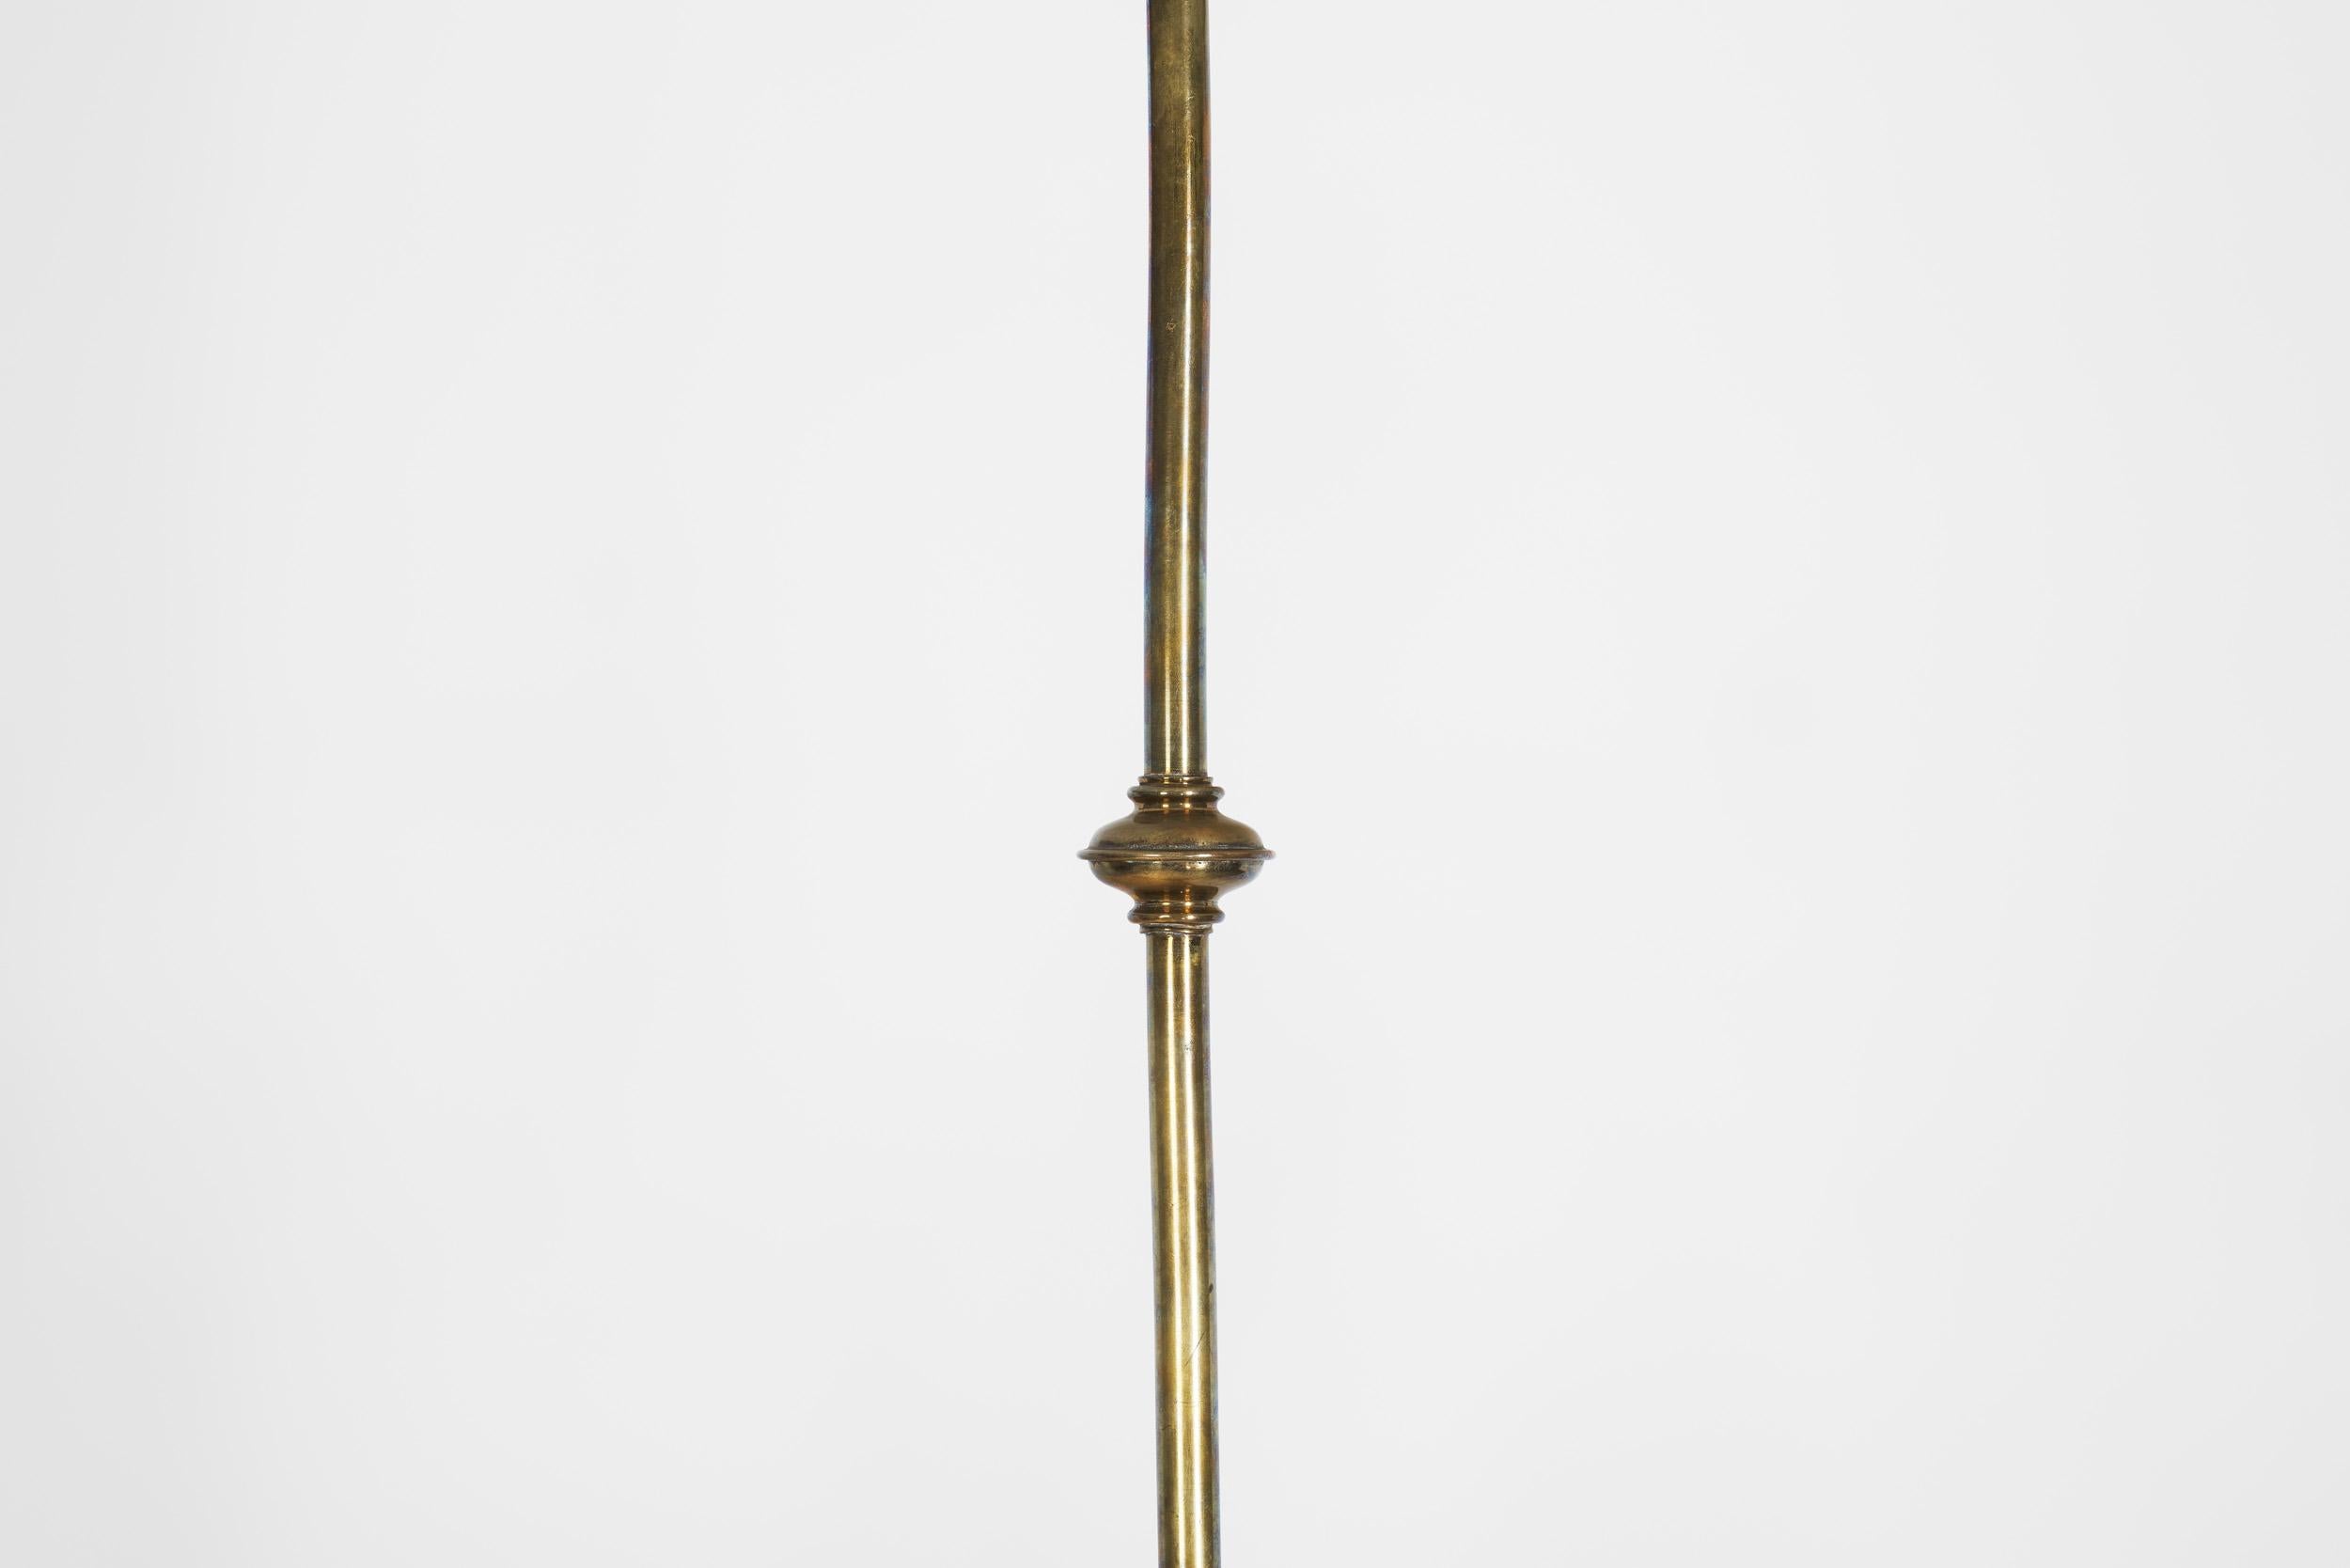 Jugend Ceiling Lamp in Patinated Brass and Glass, Europe early 20th century For Sale 3